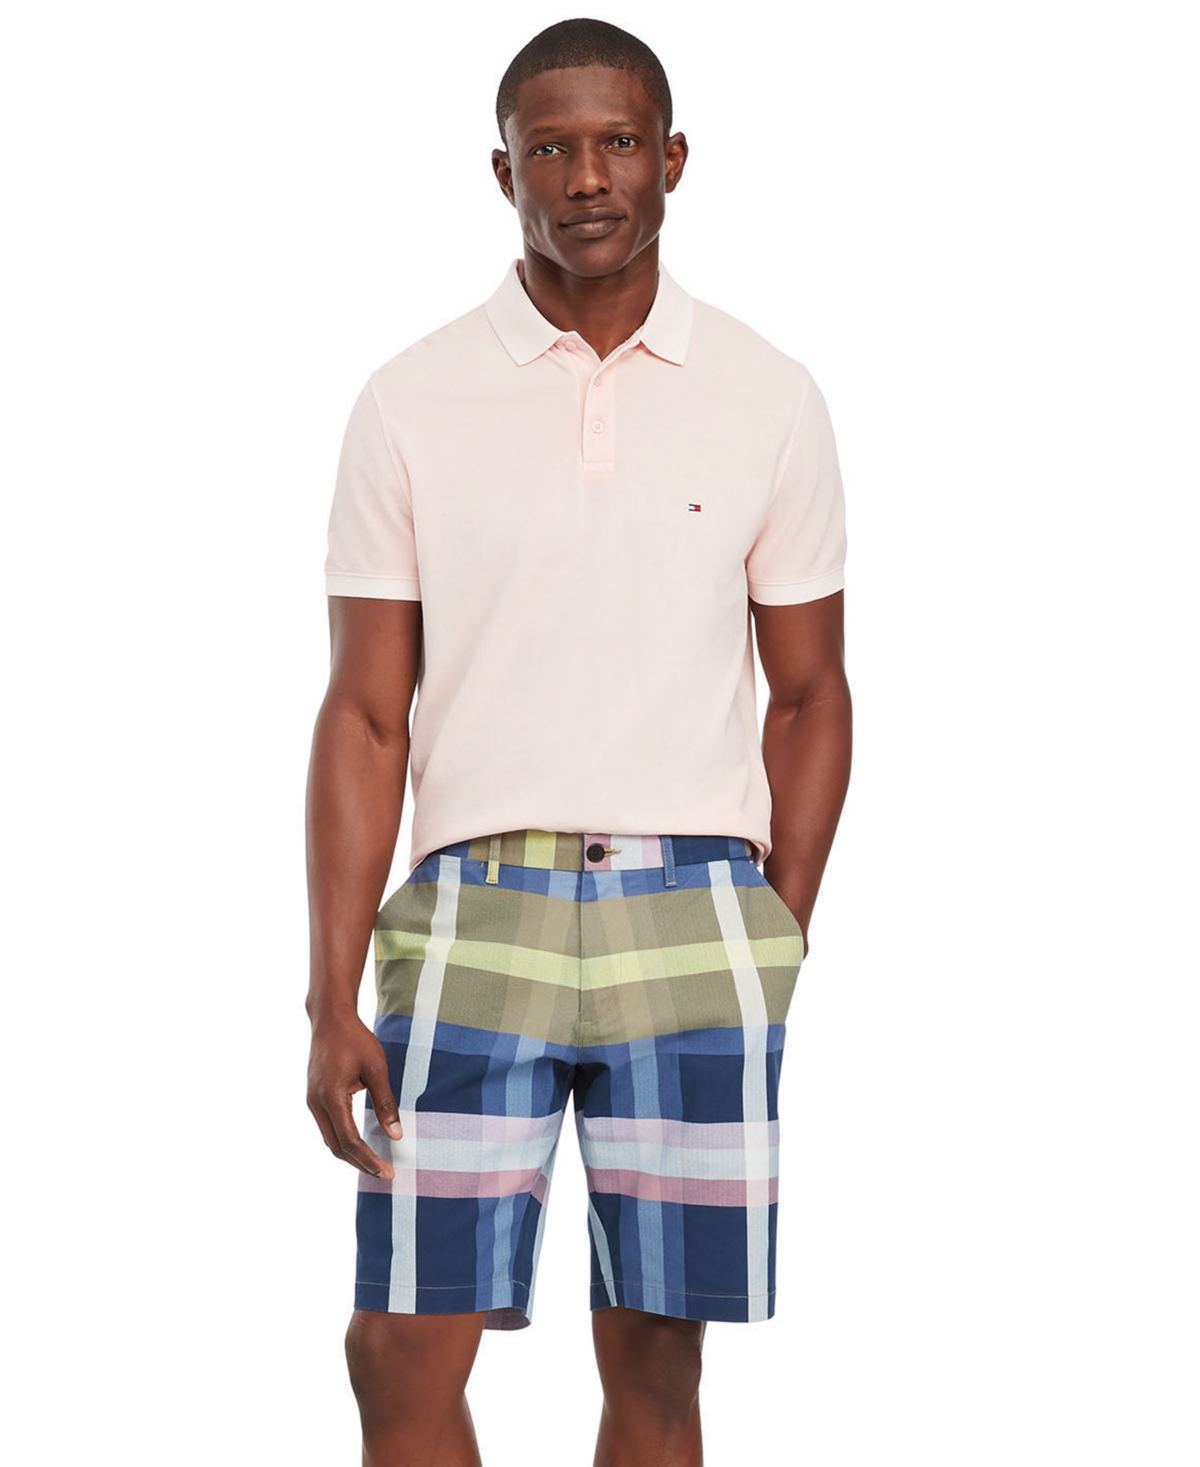 Tommy Hilfiger Men's Twill Plaid Shorts In Blue Check